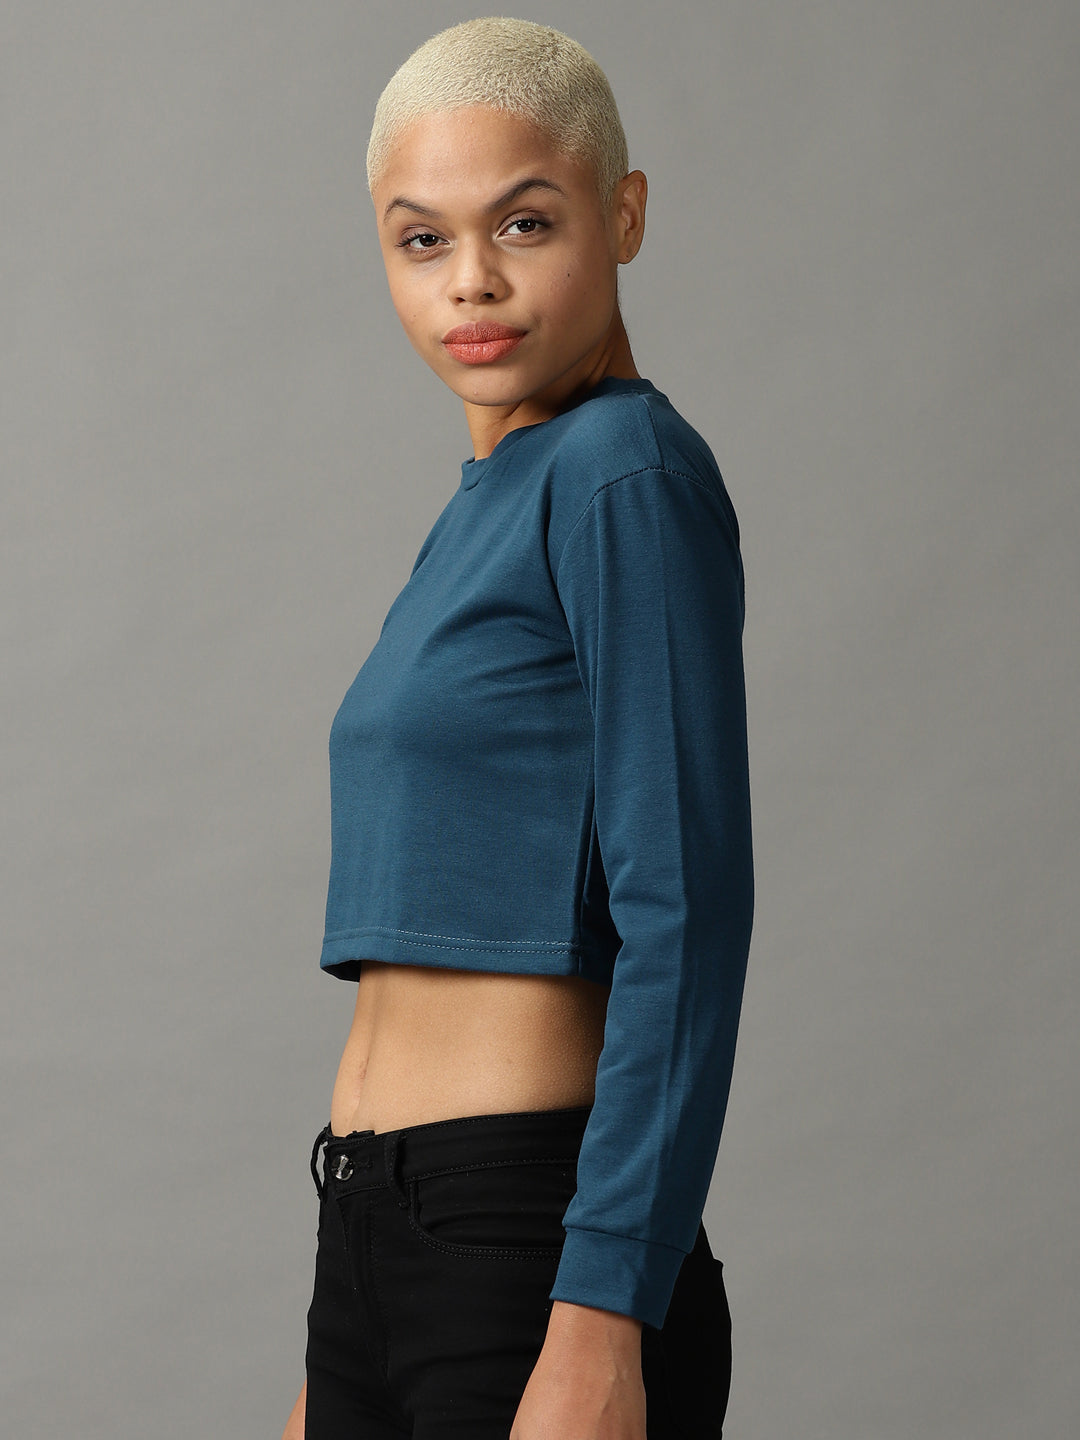 Women's Blue Solid Boxy Crop Top